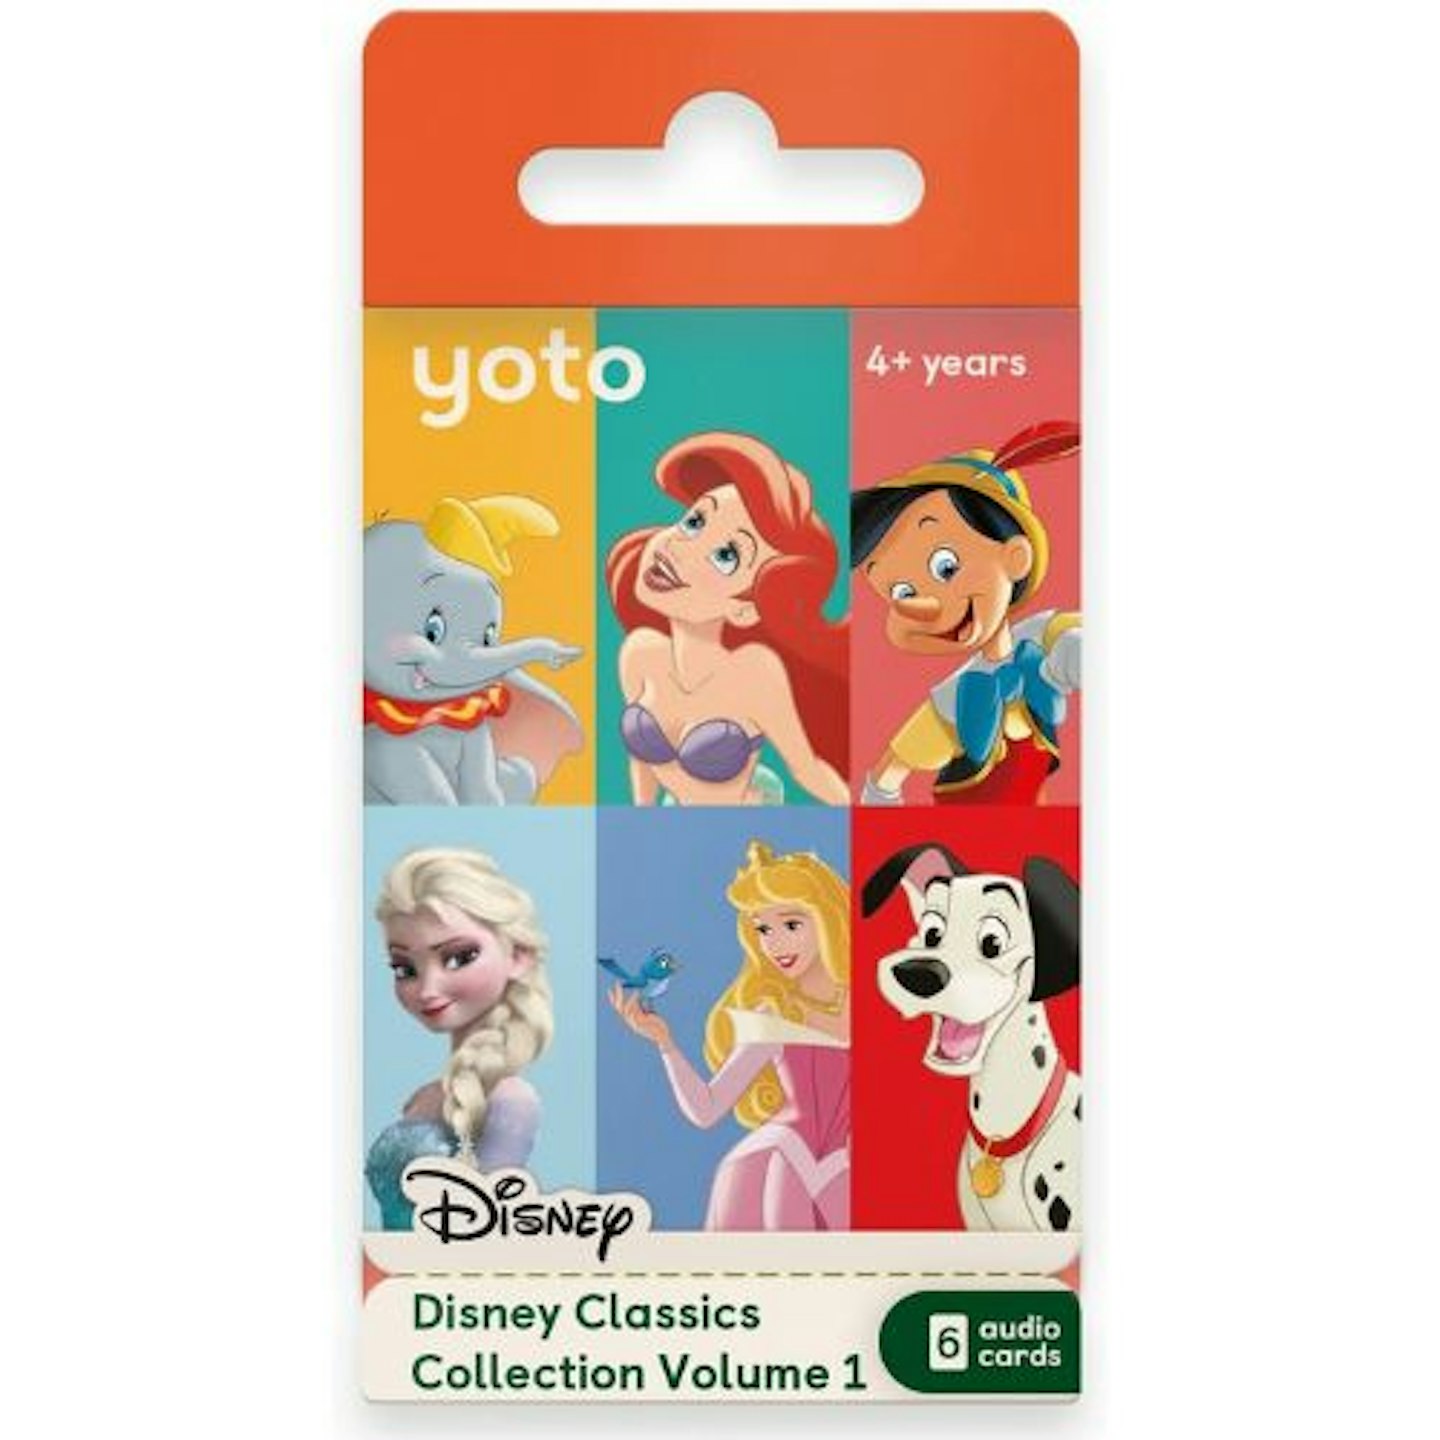 Best Yoto Player story cards Yoto Disney Classics Collection: Volume 1 by Disney